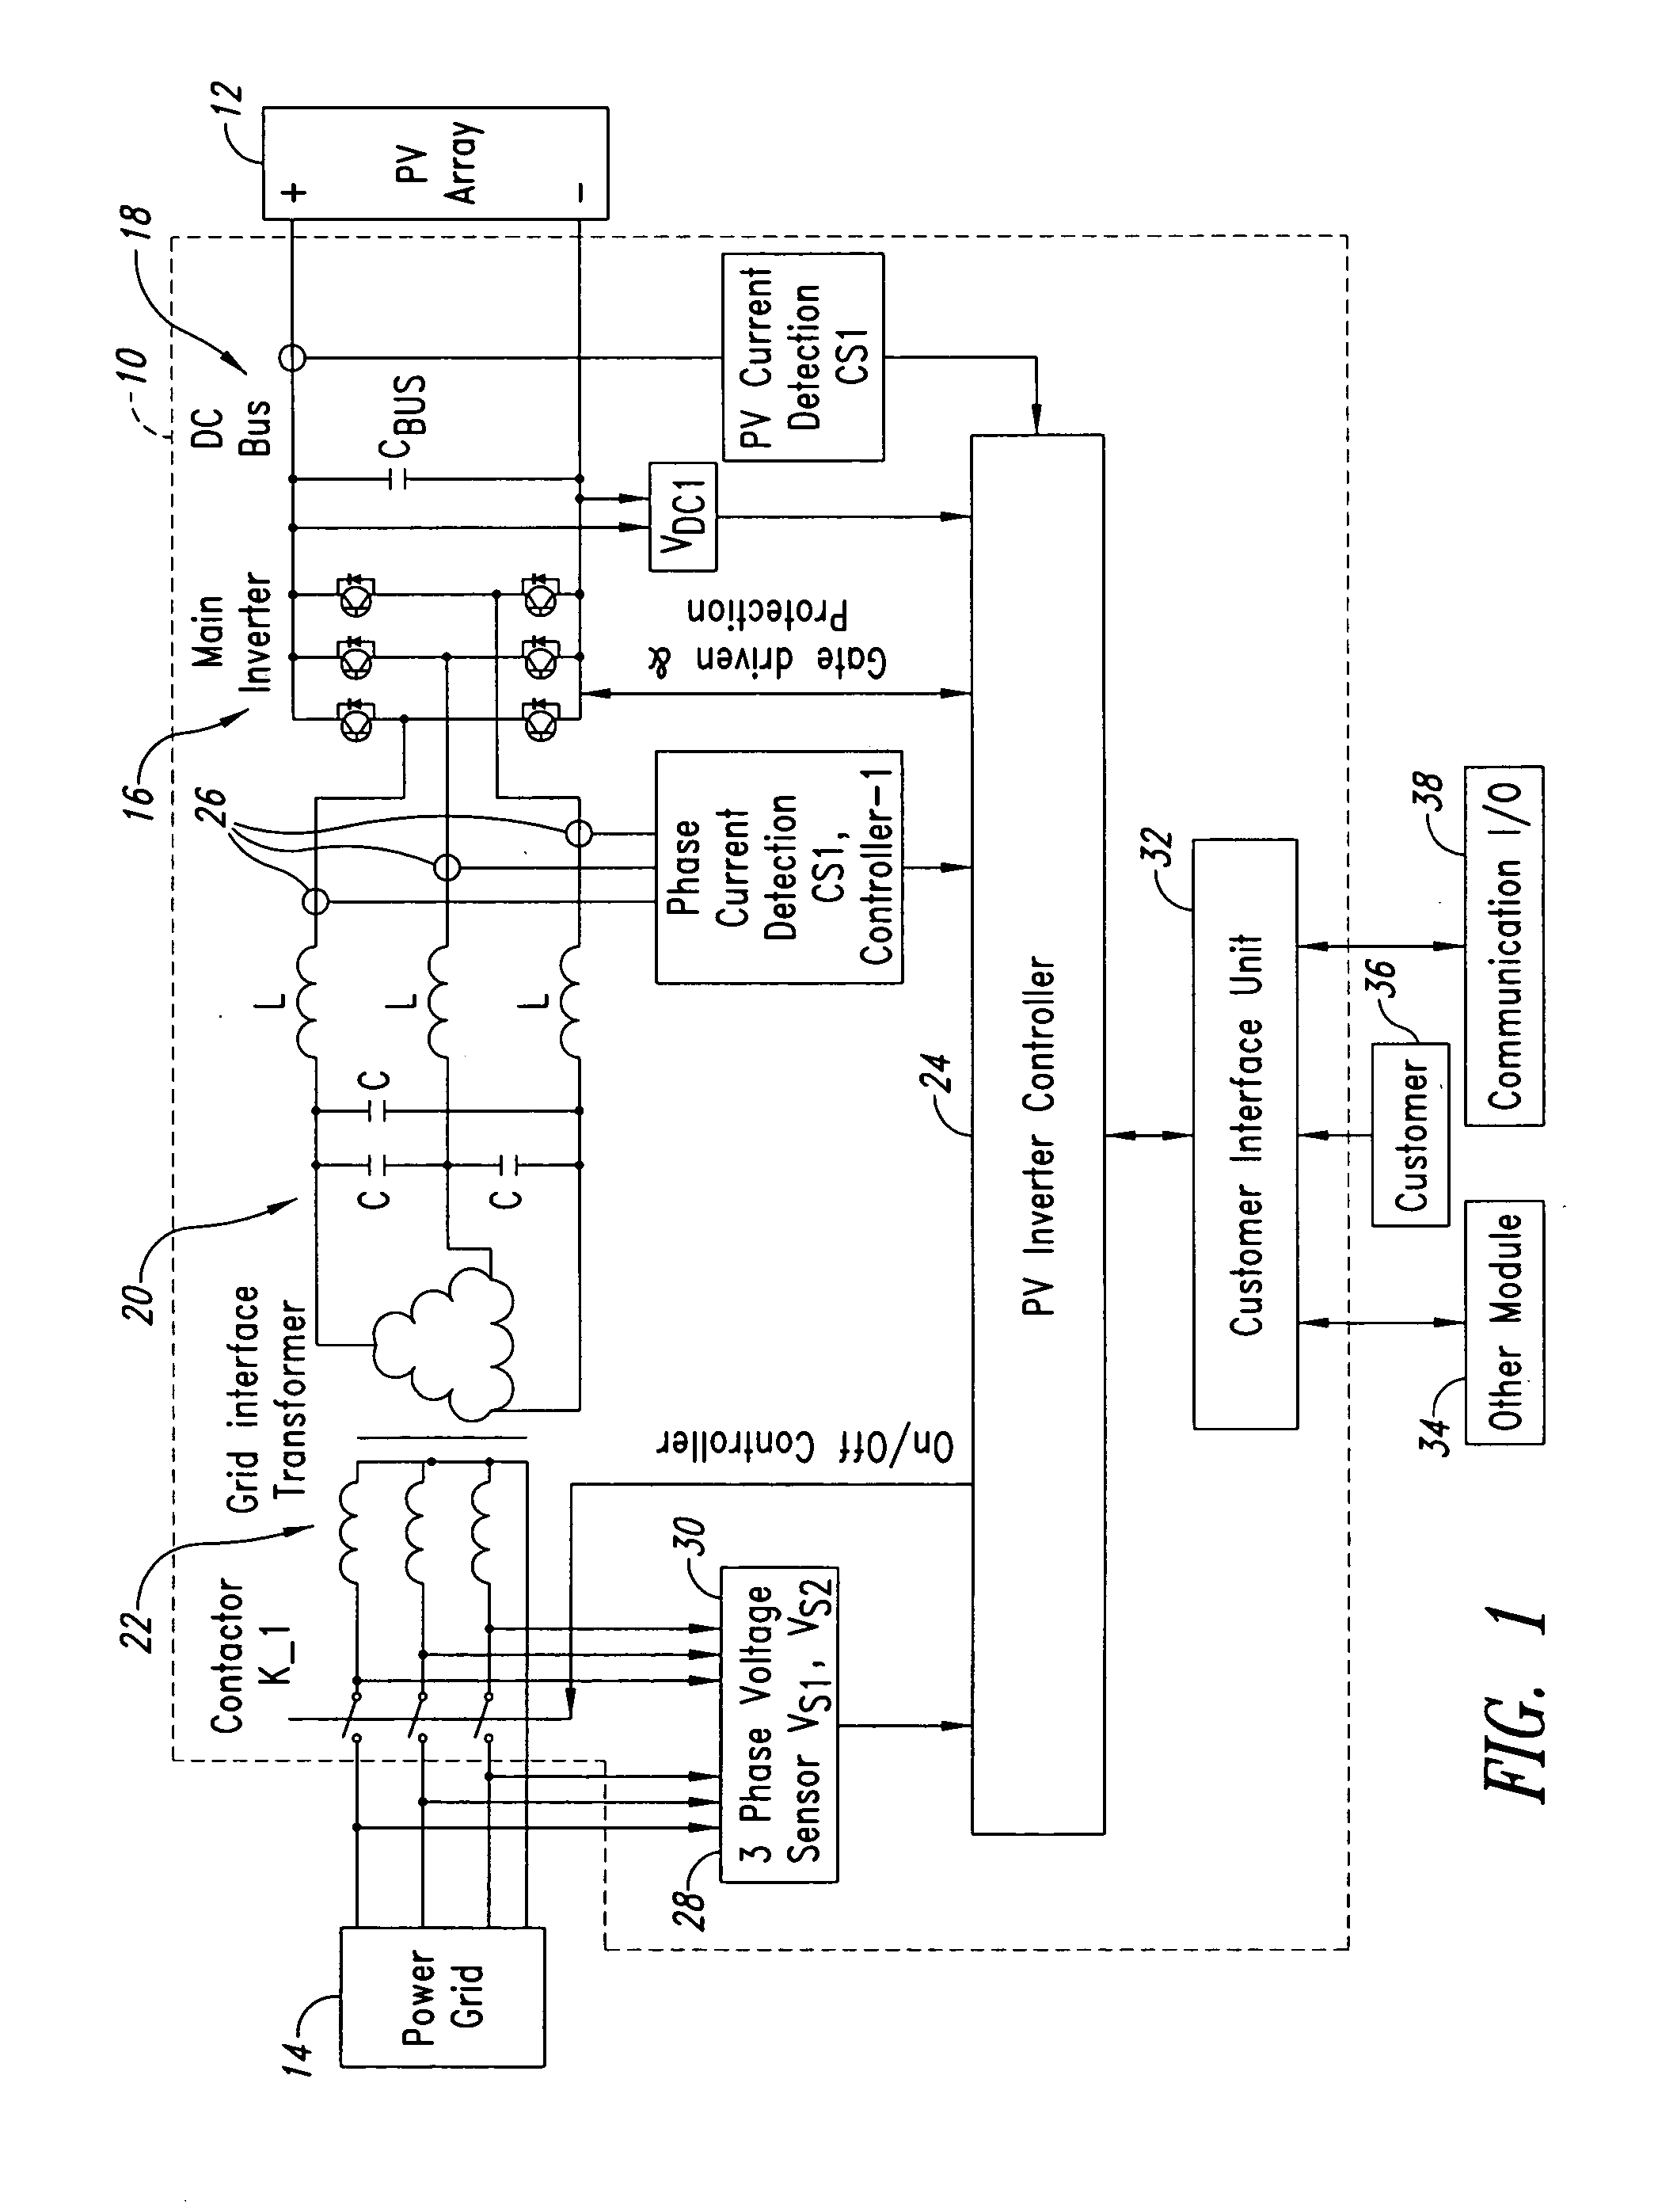 Method and apparatus for adjusting wakeup time in electrical power converter systems and transformer isolation